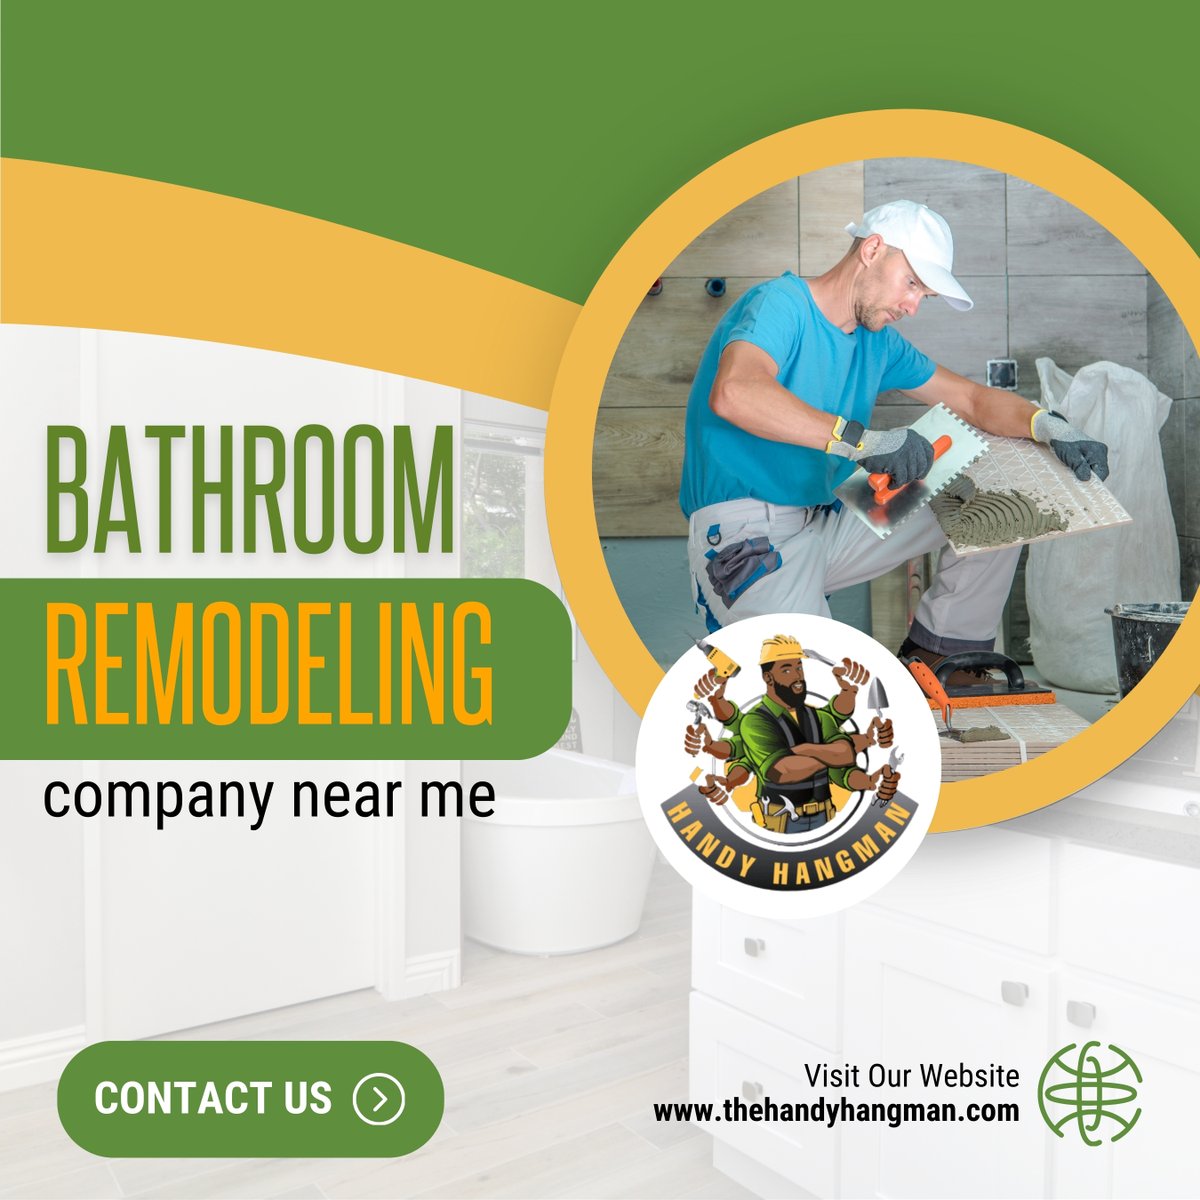 Revamp your bathroom swiftly with our Fast Bathroom Remodel Services! From tiles to fixtures, we'll upgrade your space in no time. Enjoy quick turnaround without compromising quality. Say goodbye to outdated designs and hello to a modern oasis. #BathroomRenovation #QuickRemodel